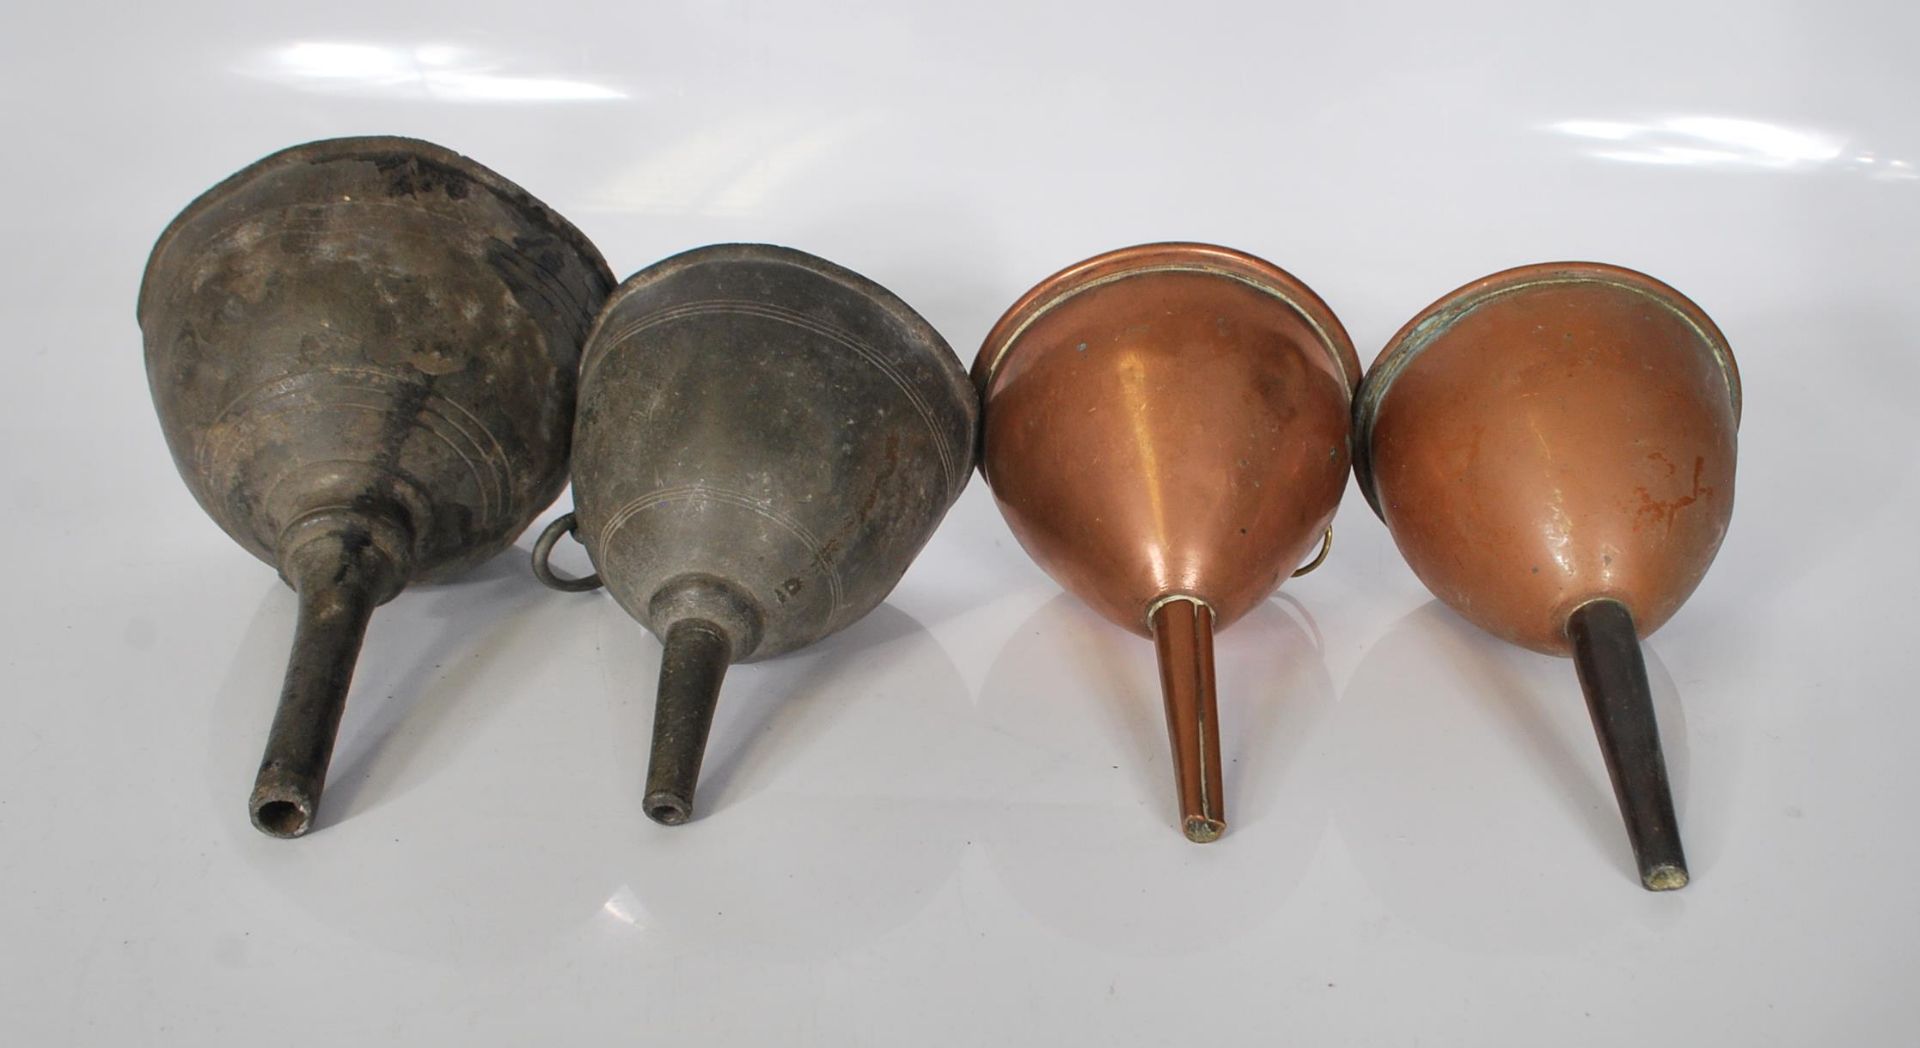 Two 19th Century Georgian wine funnels. One being pewter and the other lead with both having similar